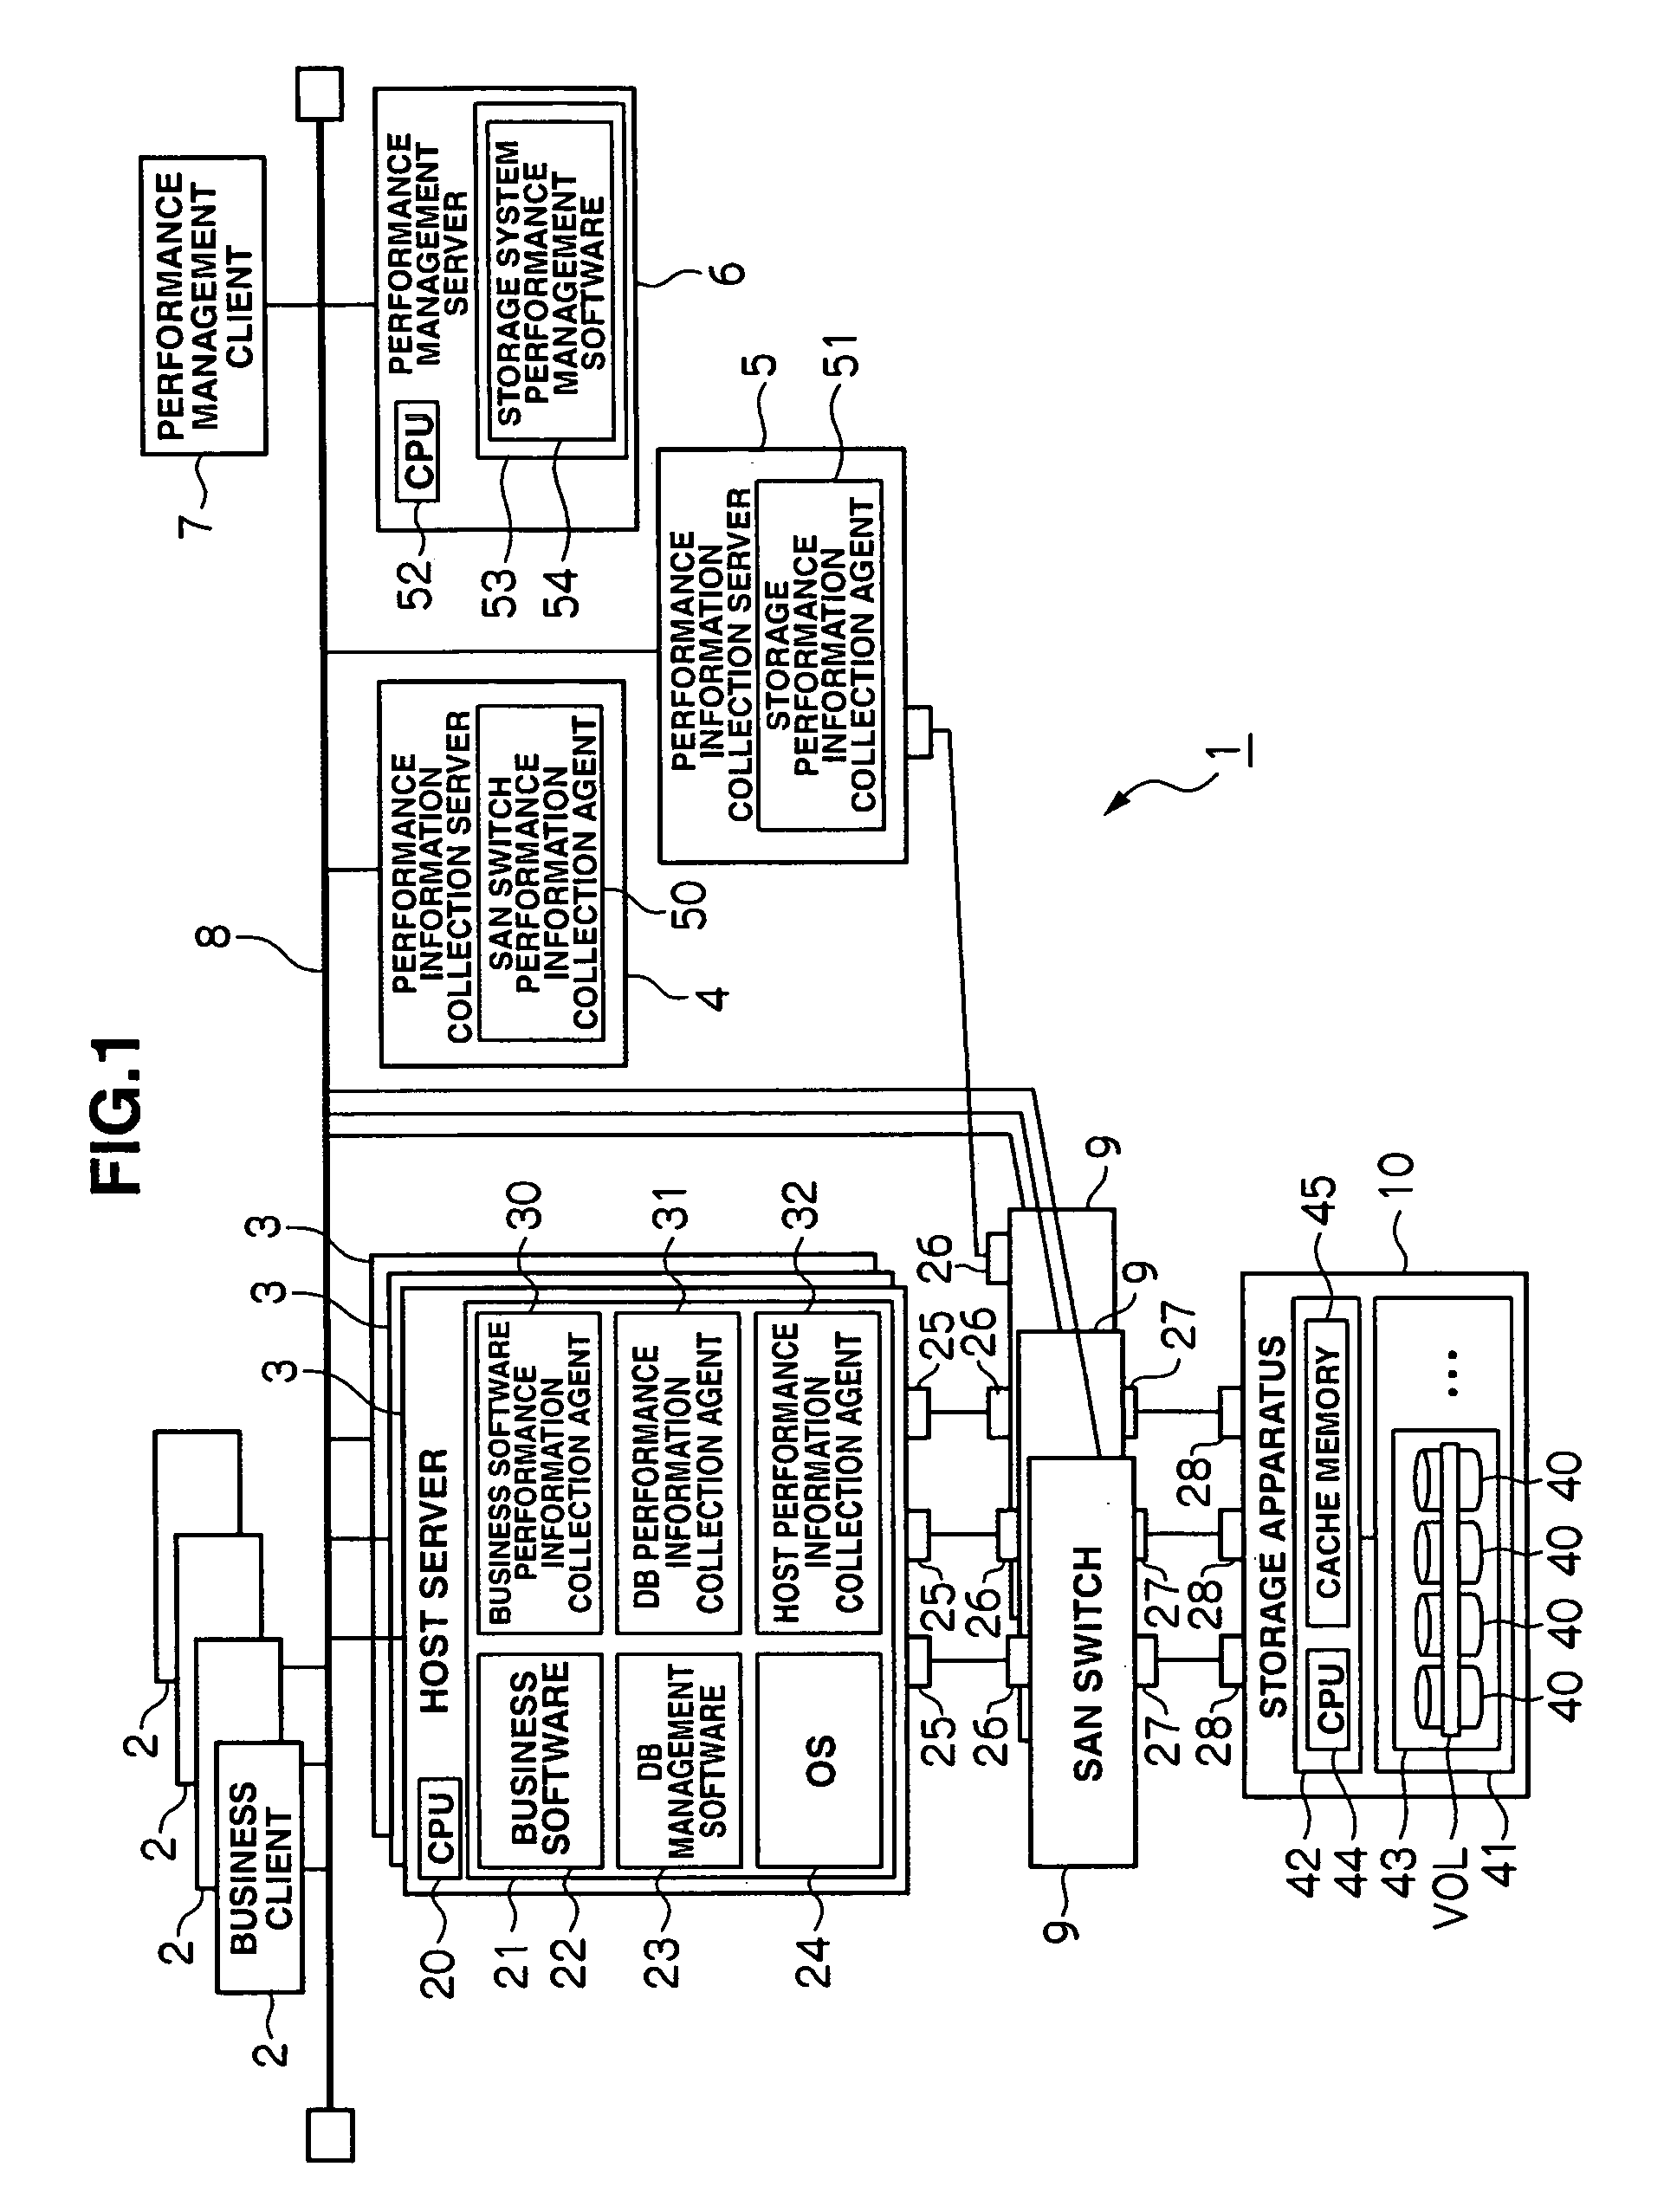 Storage system, management apparatus & method for determining a performance problem using past & current performance values of the resources